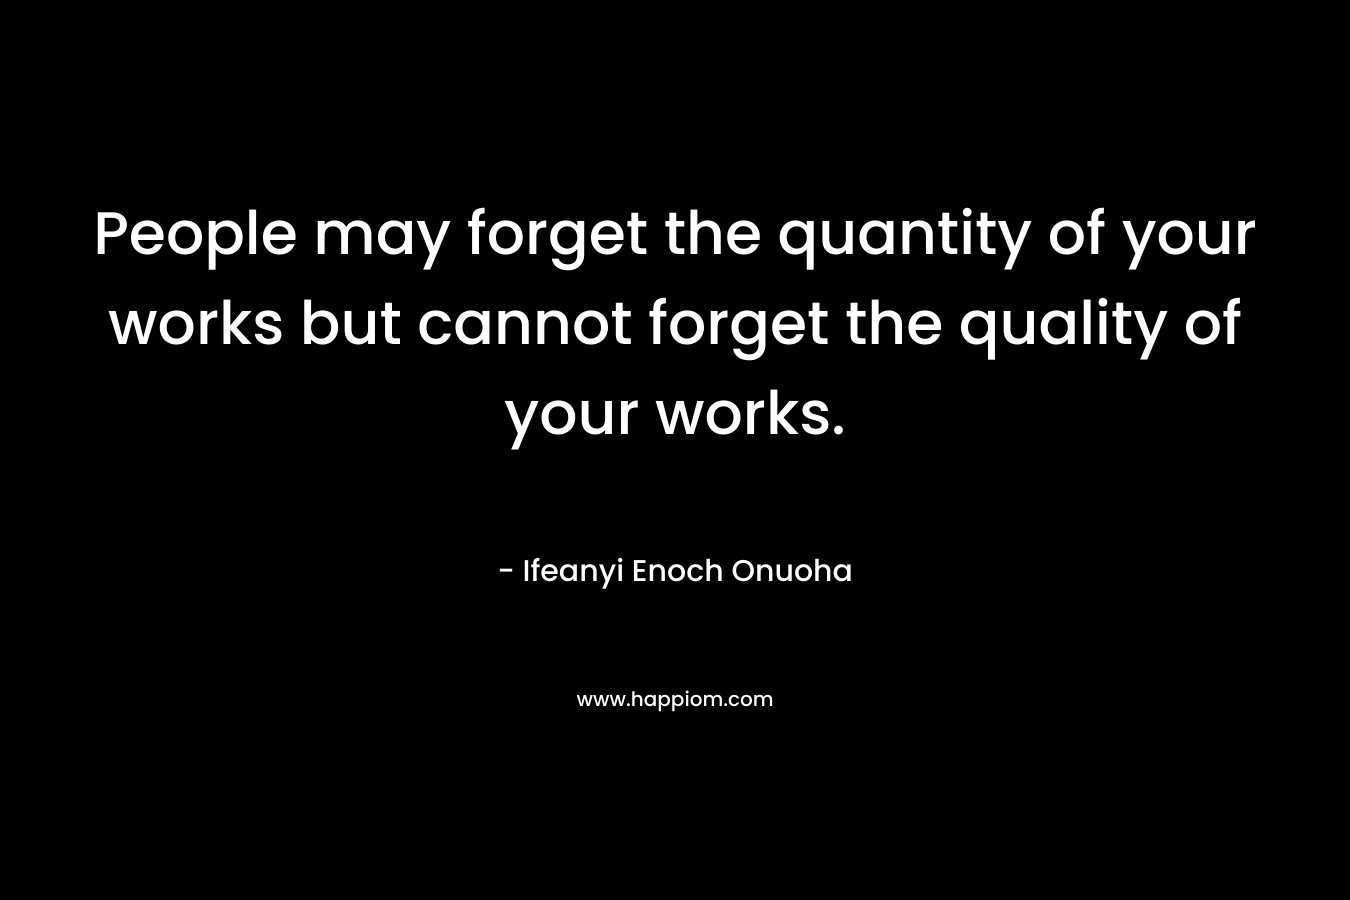 People may forget the quantity of your works but cannot forget the quality of your works.